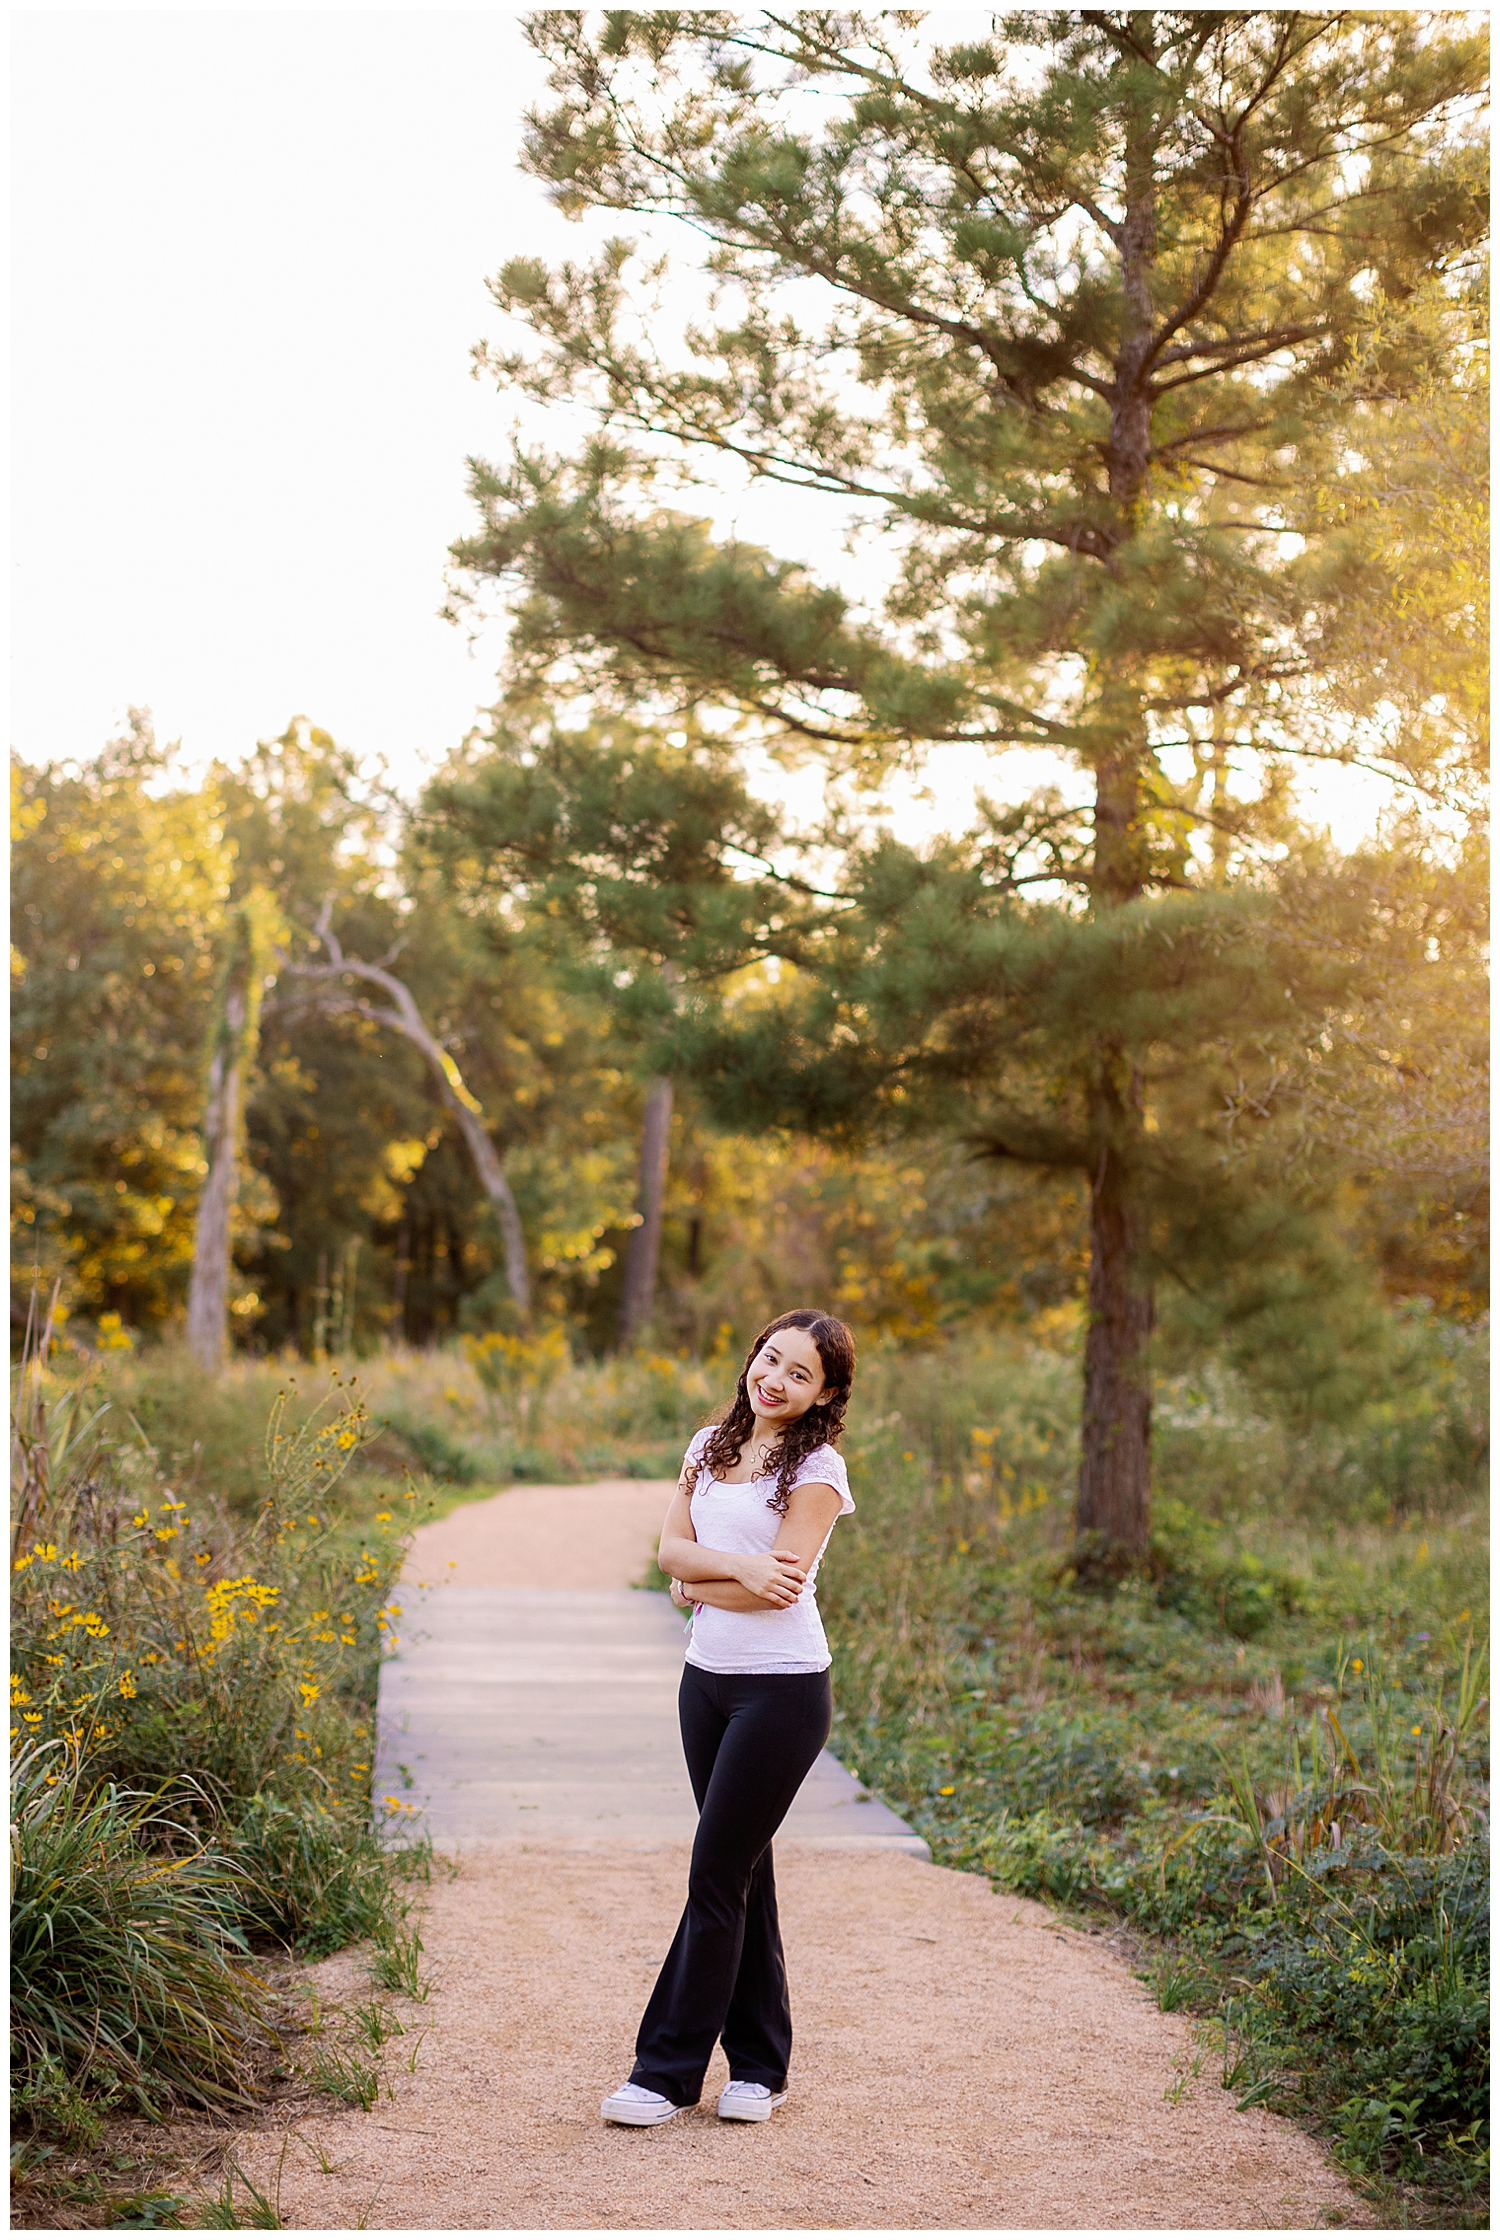 girl in jeans and white shirt standing on pathway with trees